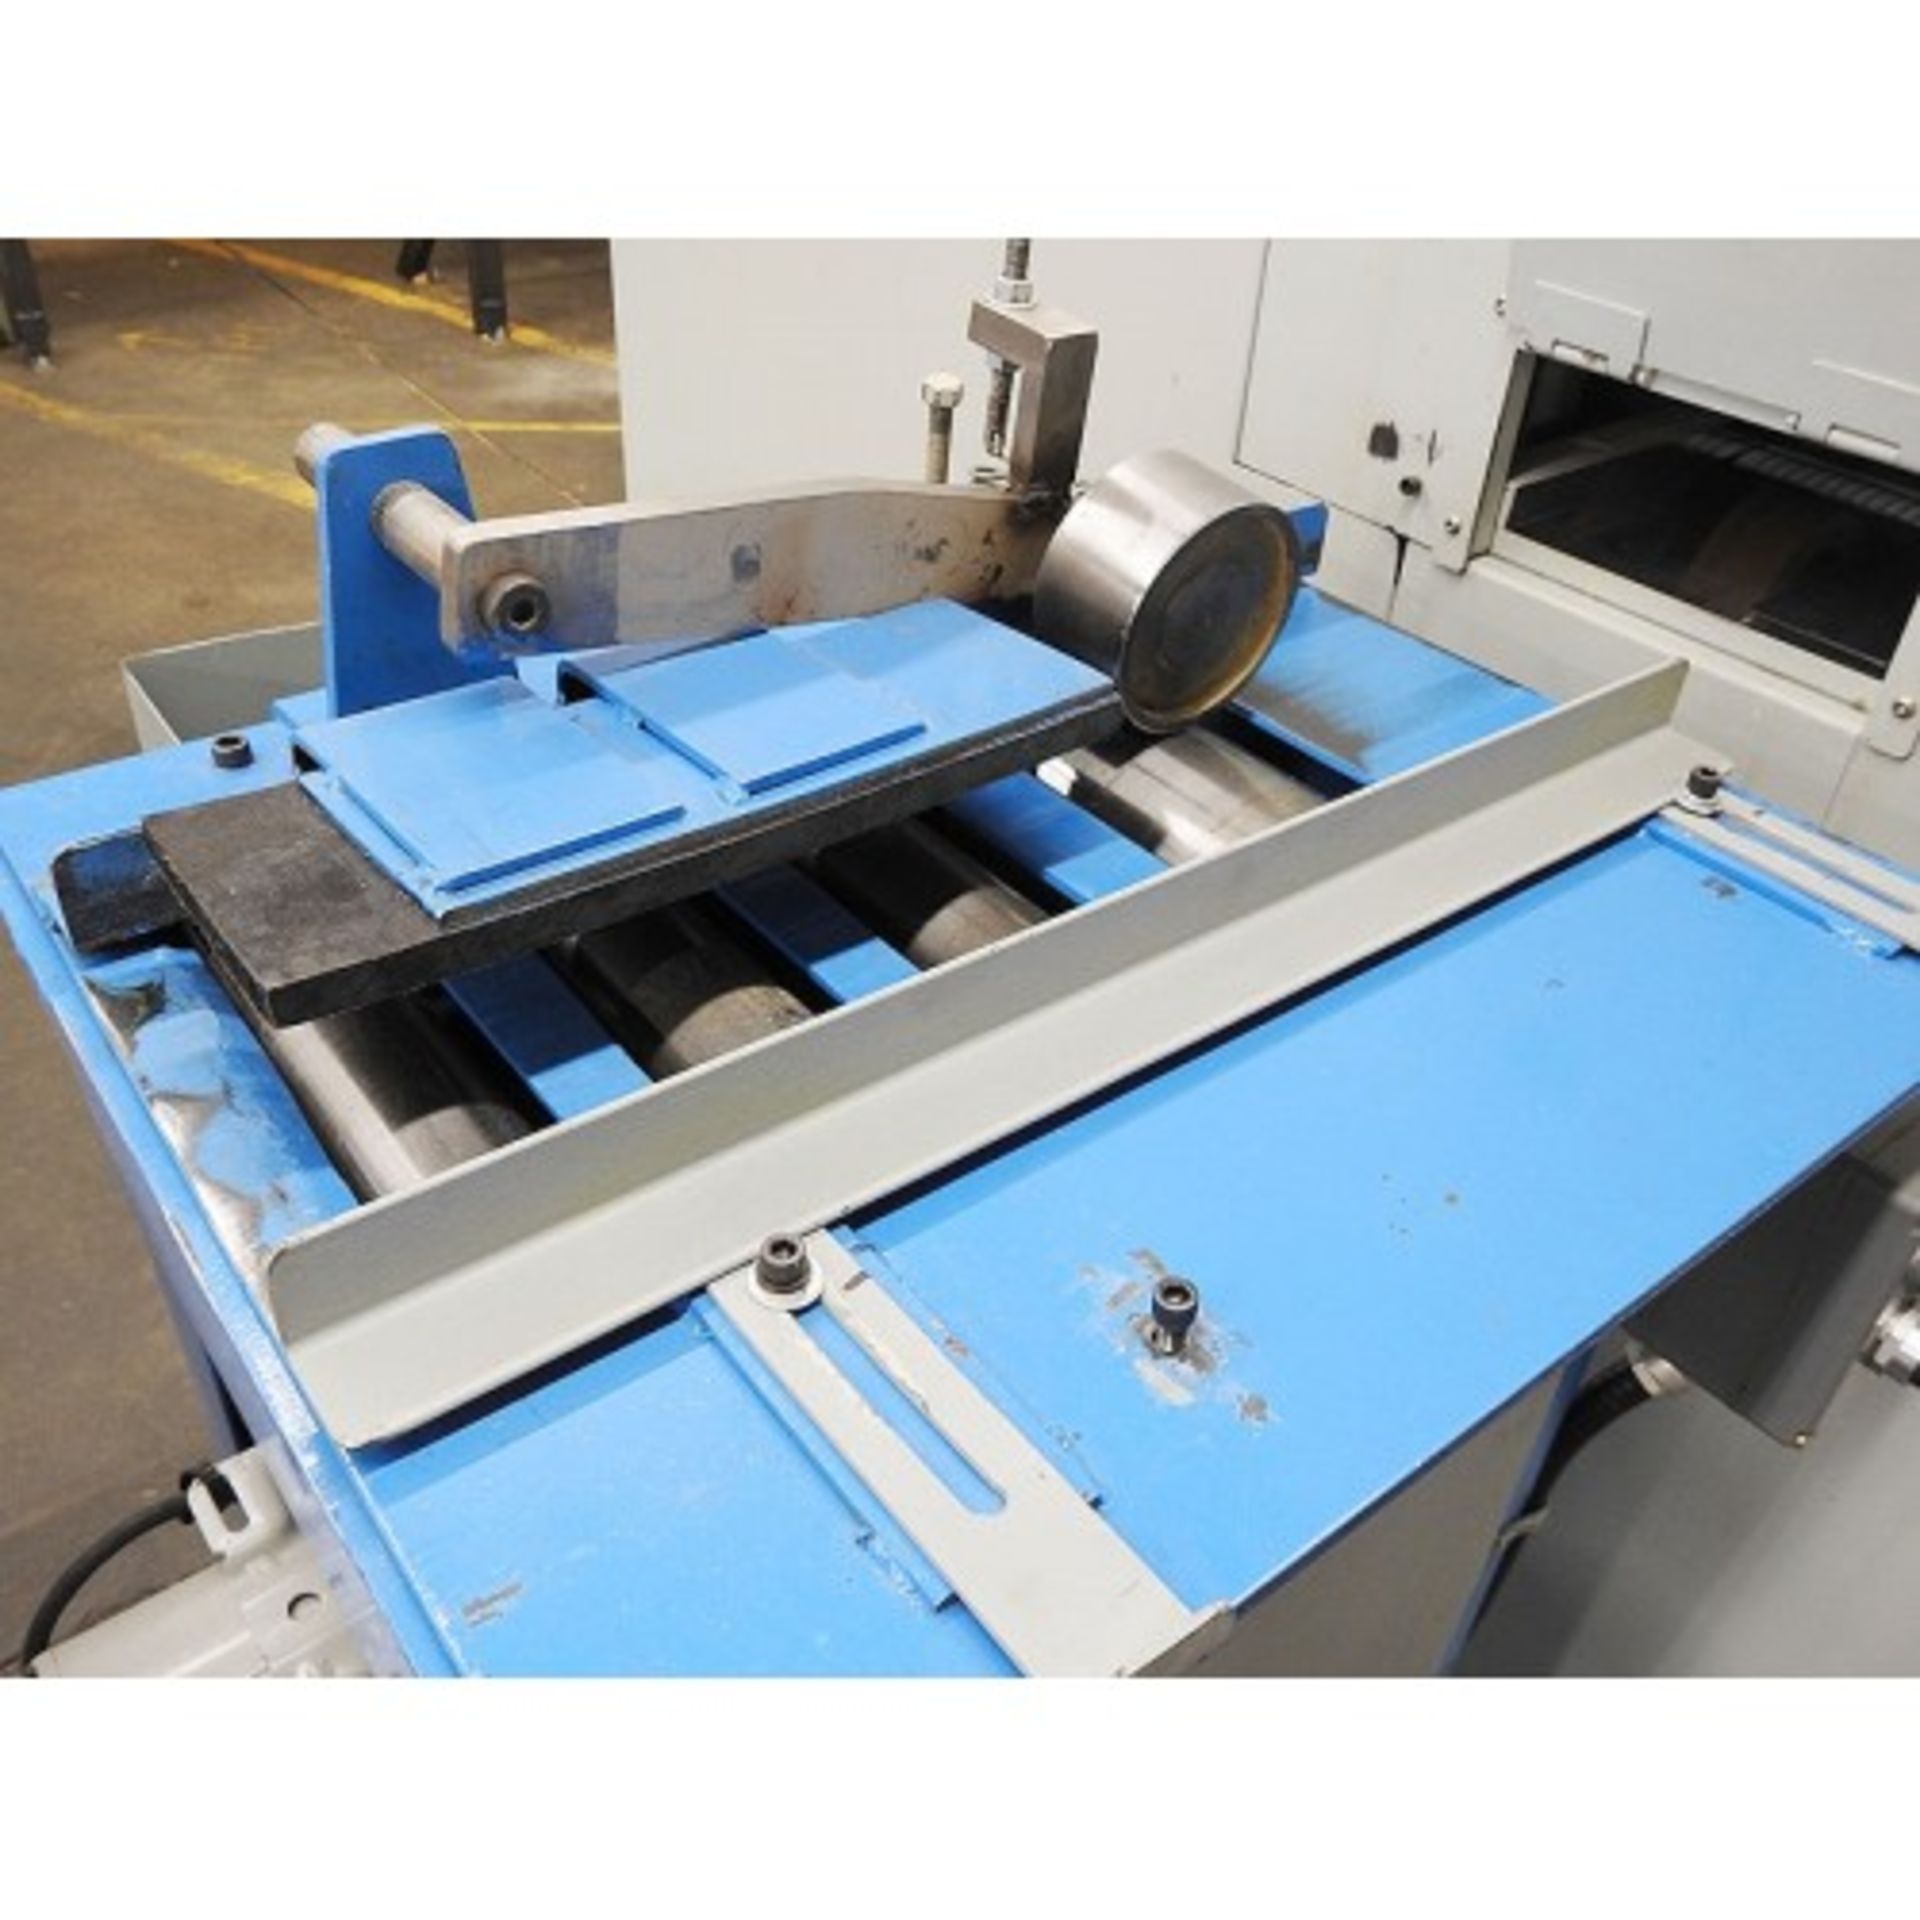 2014 Kentwood RS-6 Randomizer Automated Scraping Floor Machine - Image 9 of 9